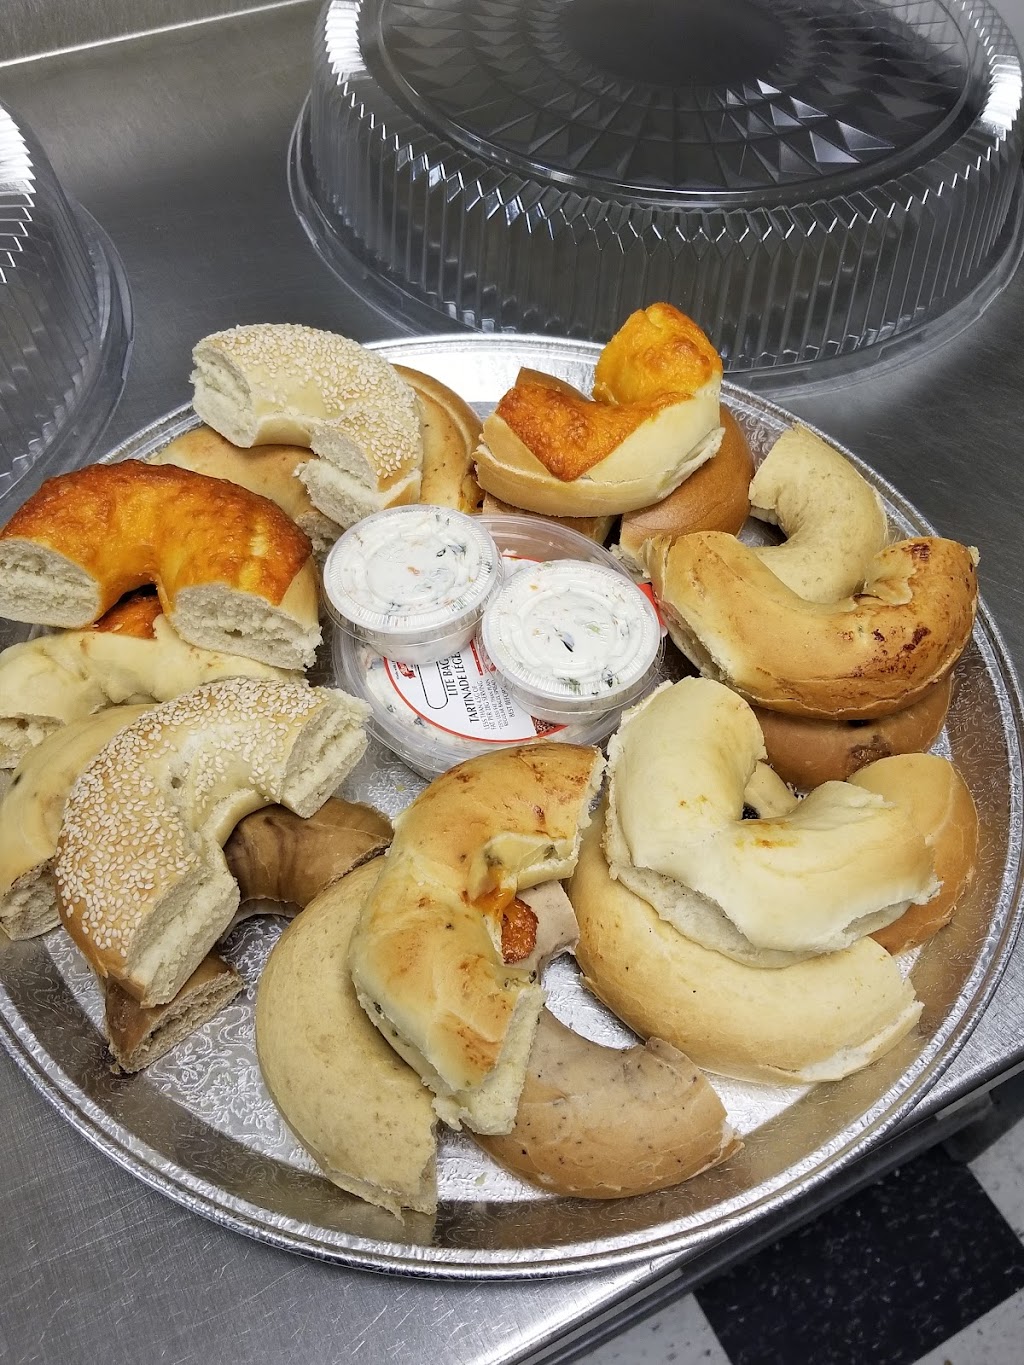 The Great Canadian Bagel | bakery | 705 Kingston Rd, Pickering, ON L1V 6K3, Canada | 9054207027 OR +1 905-420-7027